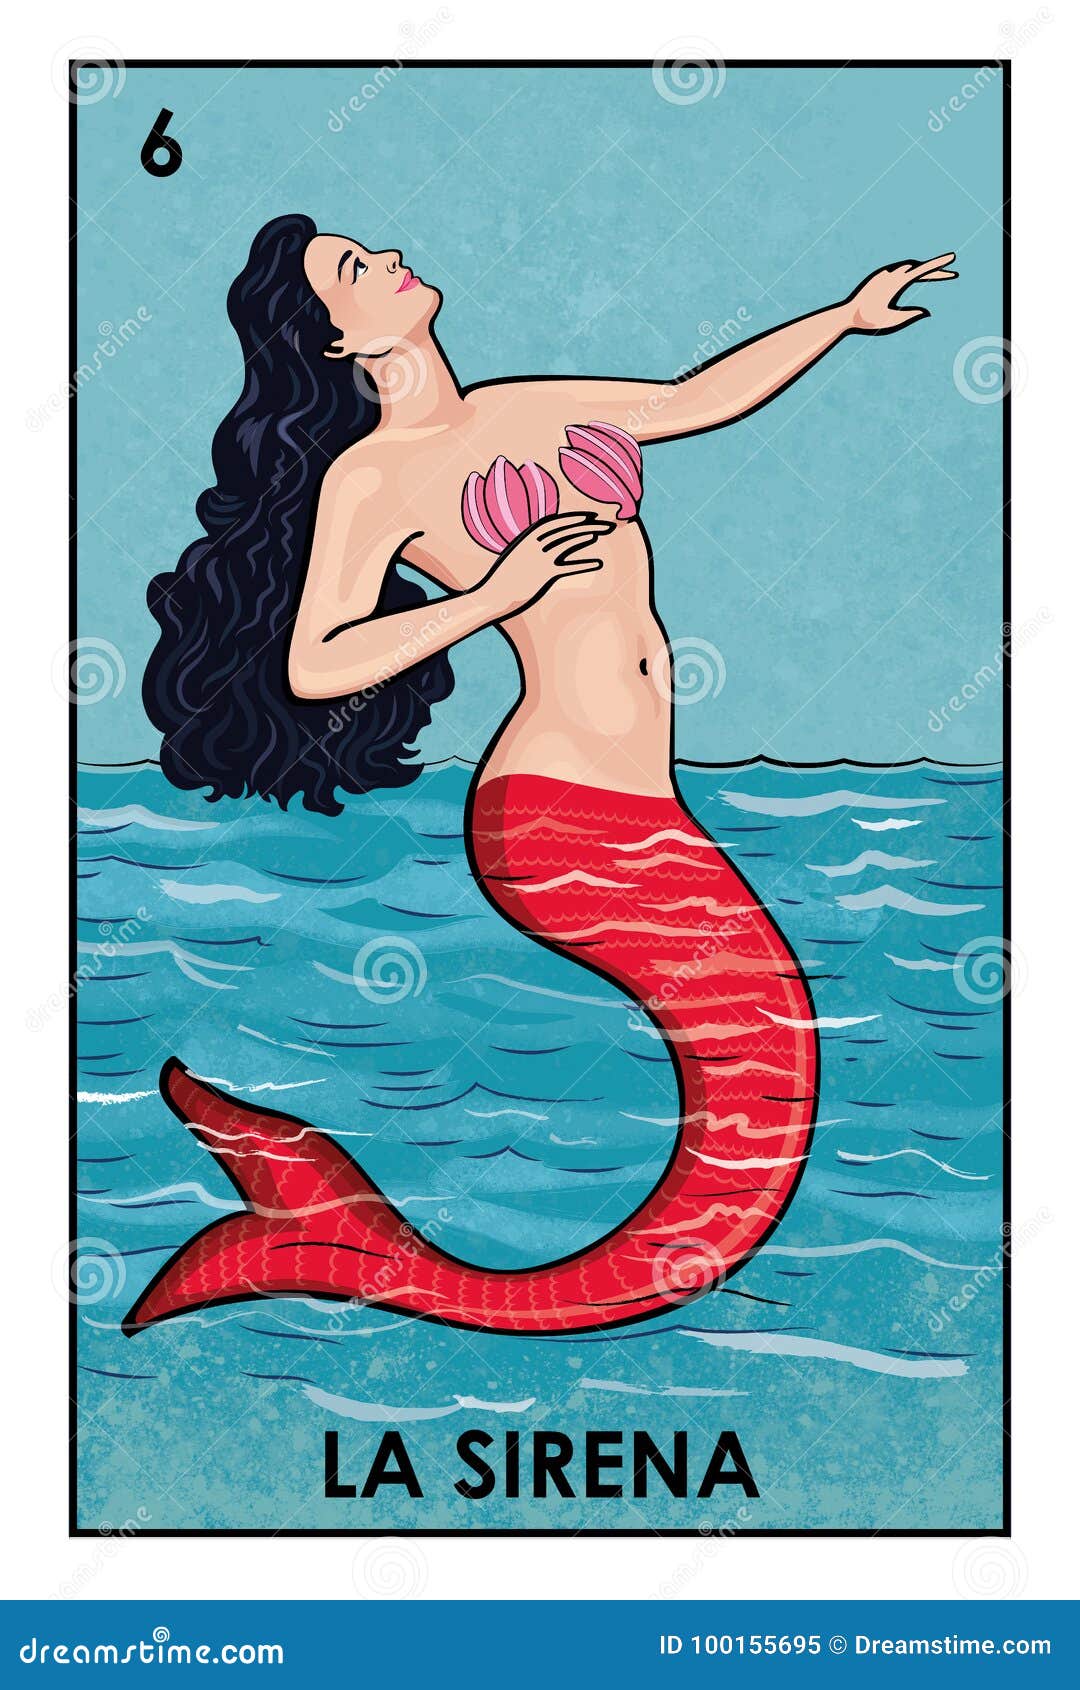 https://thumbs.dreamstime.com/z/high-resolution-image-mexican-lottery-character-la-sirena-illustration-black-haired-mermaid-red-tale-pink-sea-shells-100155695.jpg